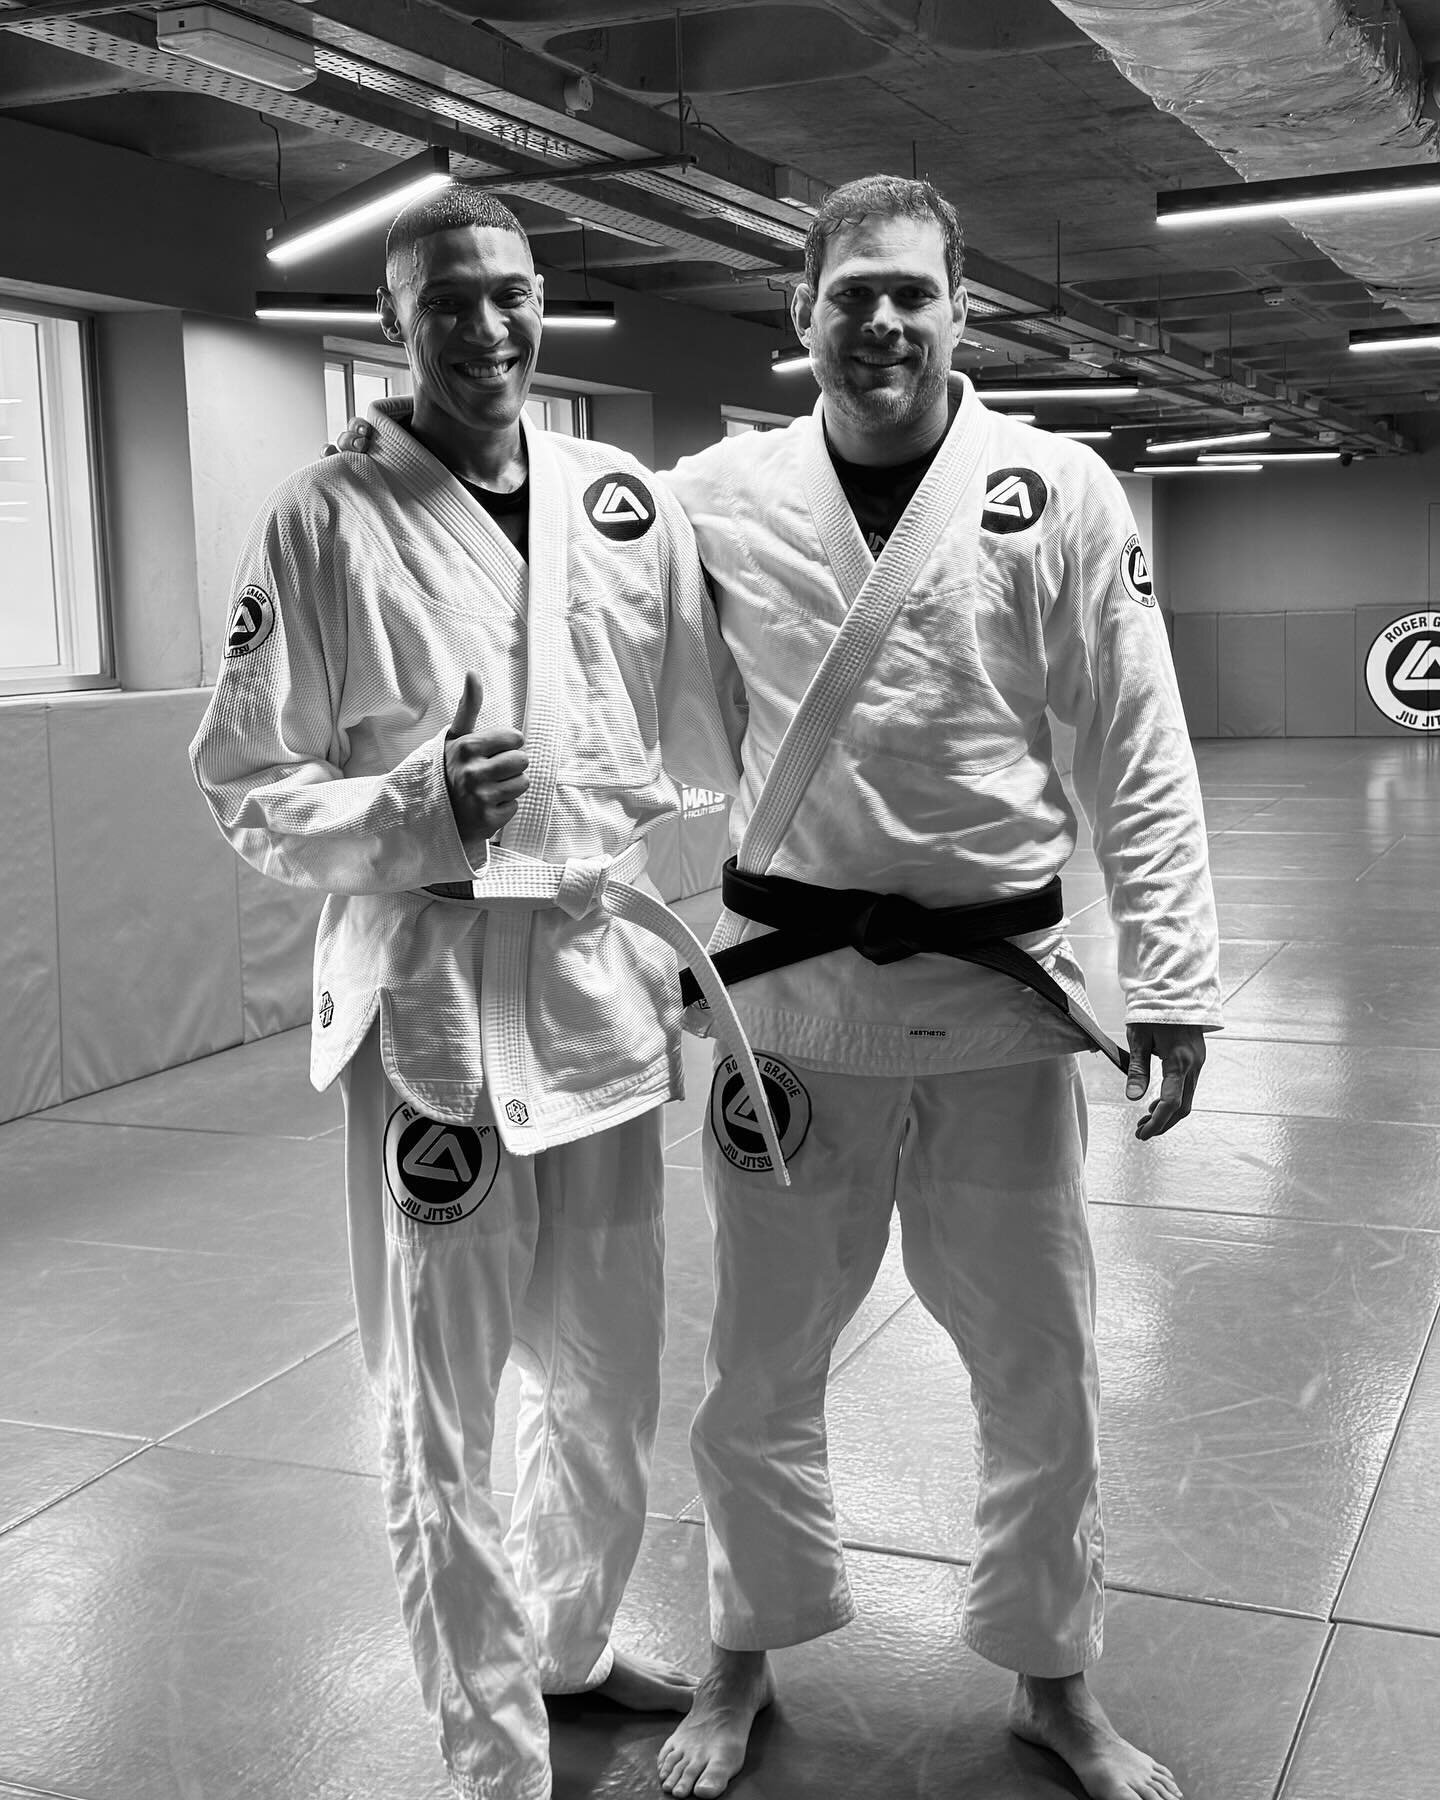 It was great to see the legend himself @rogergracie !!!

I am grateful to him and @mauriciogomes.bjj for helping me to get started on this journey. I quite often find myself thinking same thing; &ldquo;I wish I started this when I was a lot younger, 